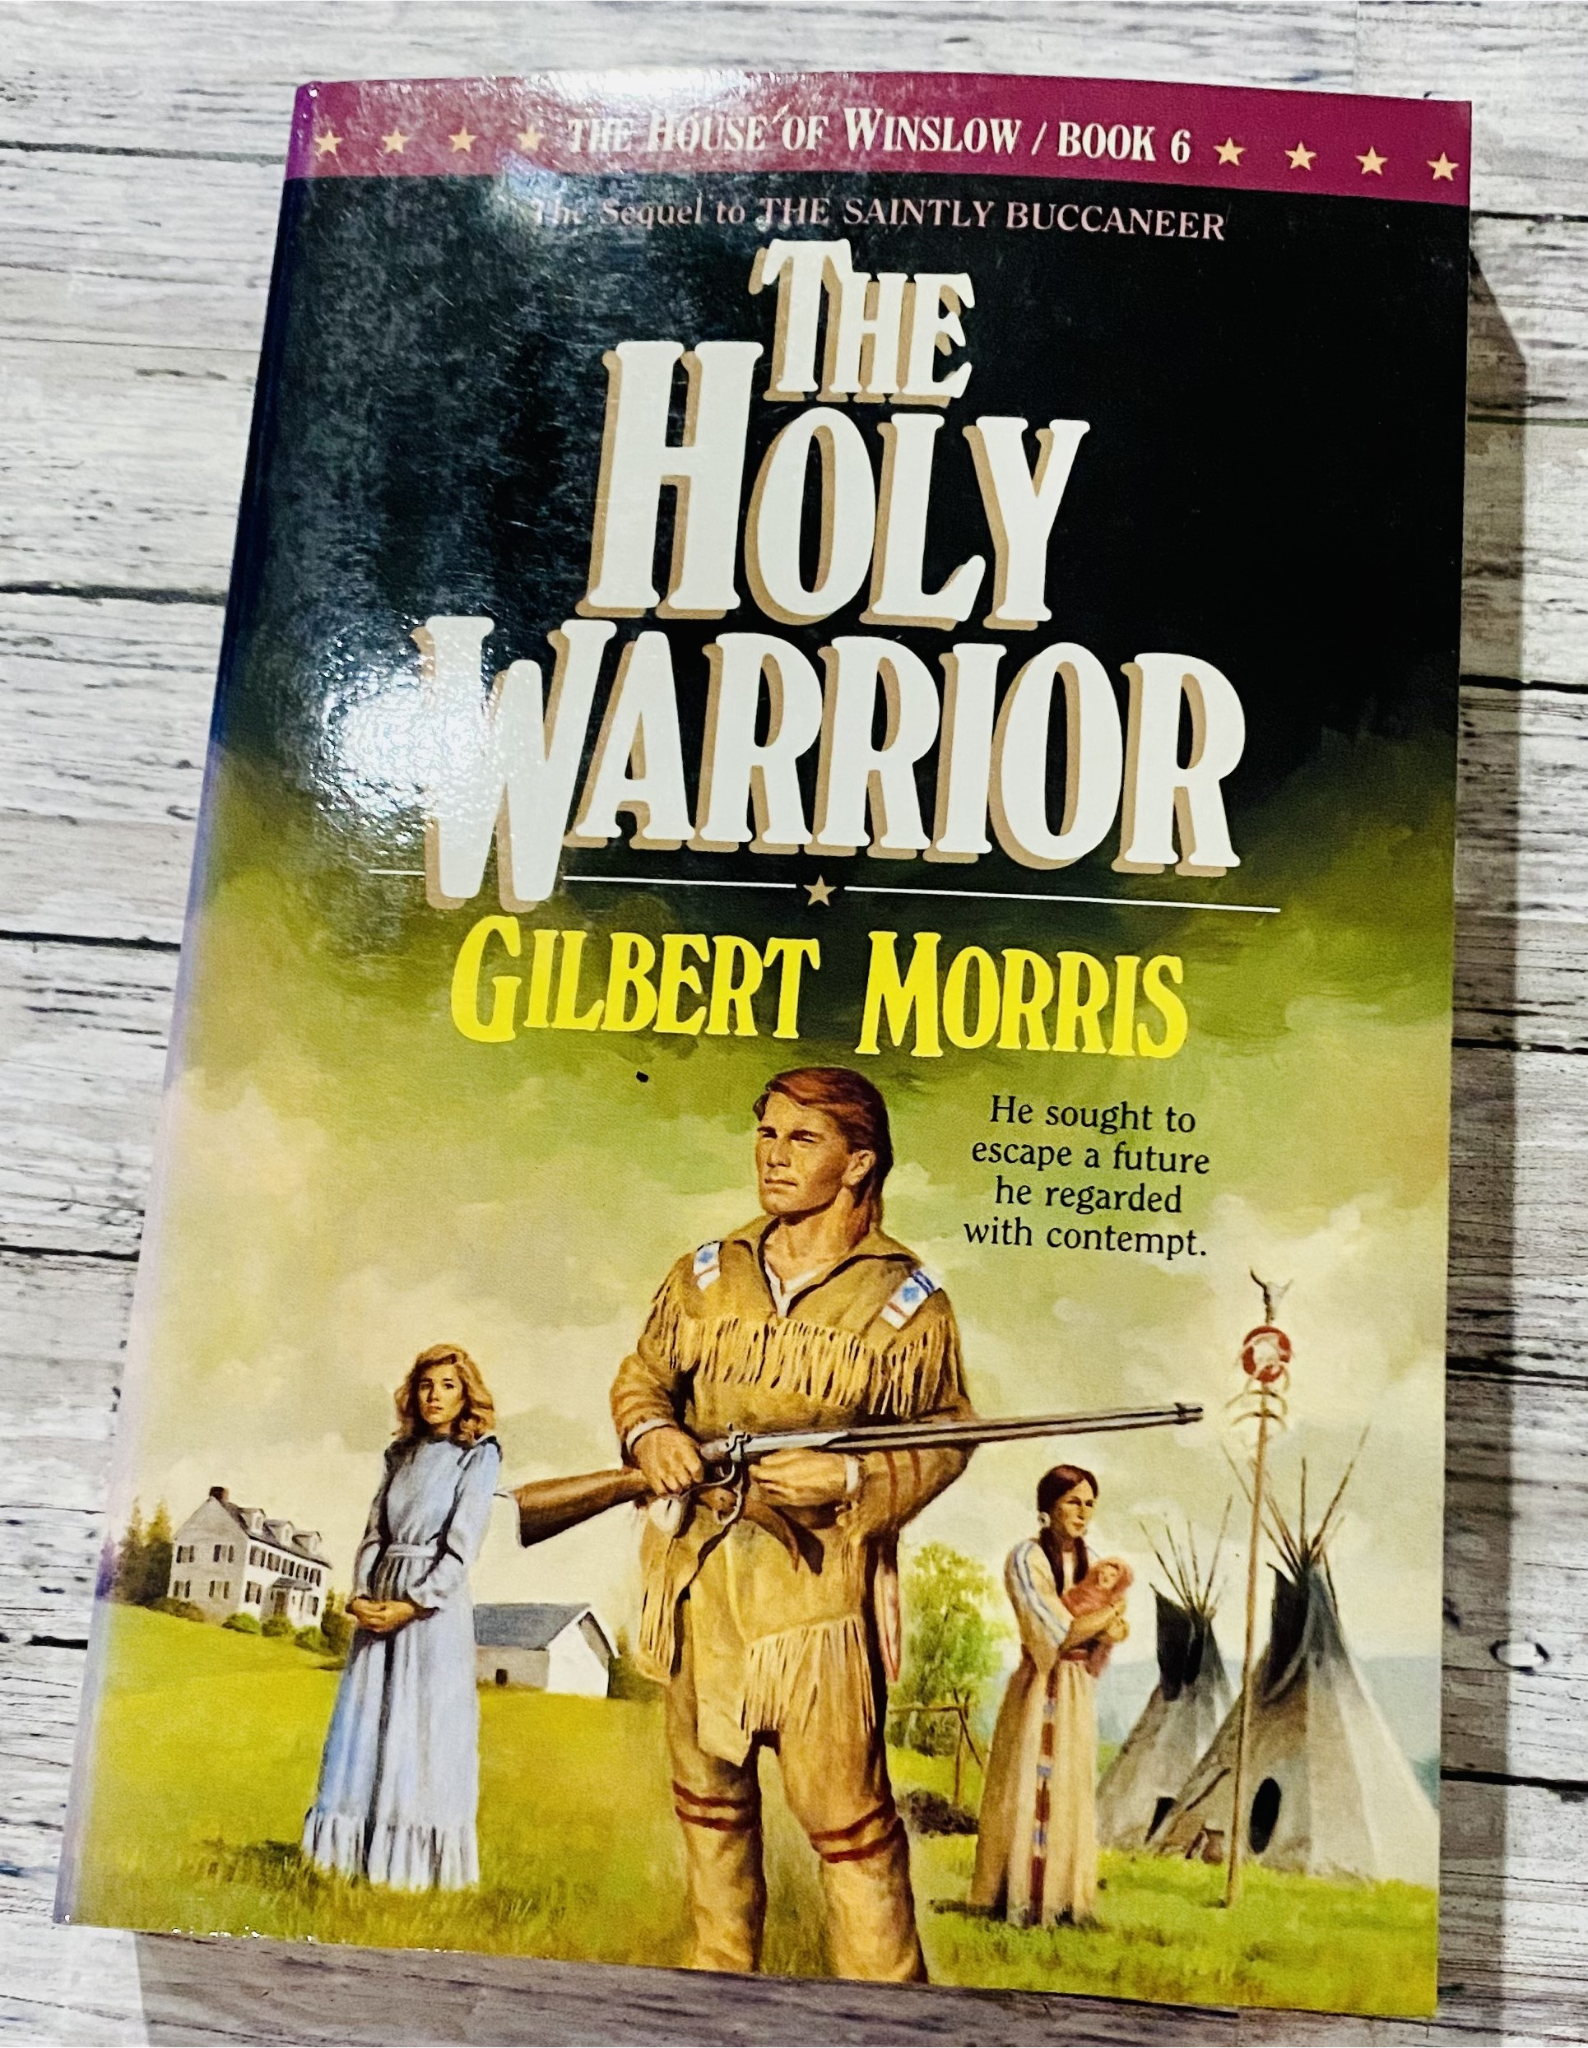 The House of Winslow Series: The Holy Warrior, Book 6* - Anchored Homeschool Resource Center